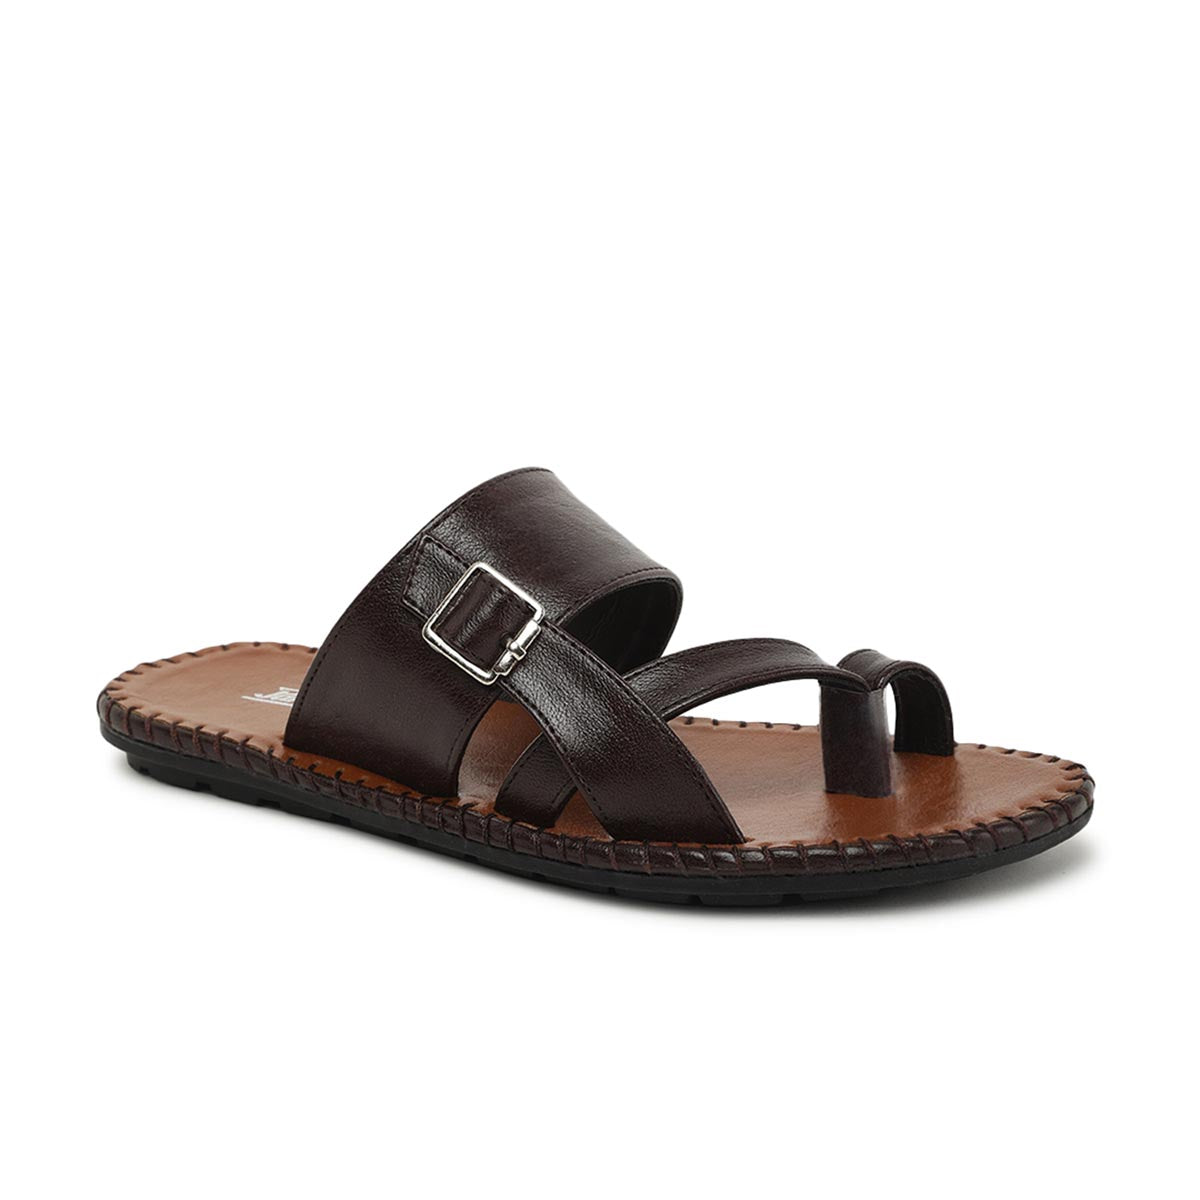 Paragon K2001G Men Stylish Sandals | Comfortable Sandals for Daily Outdoor Use | Casual Formal Sandals with Cushioned Soles